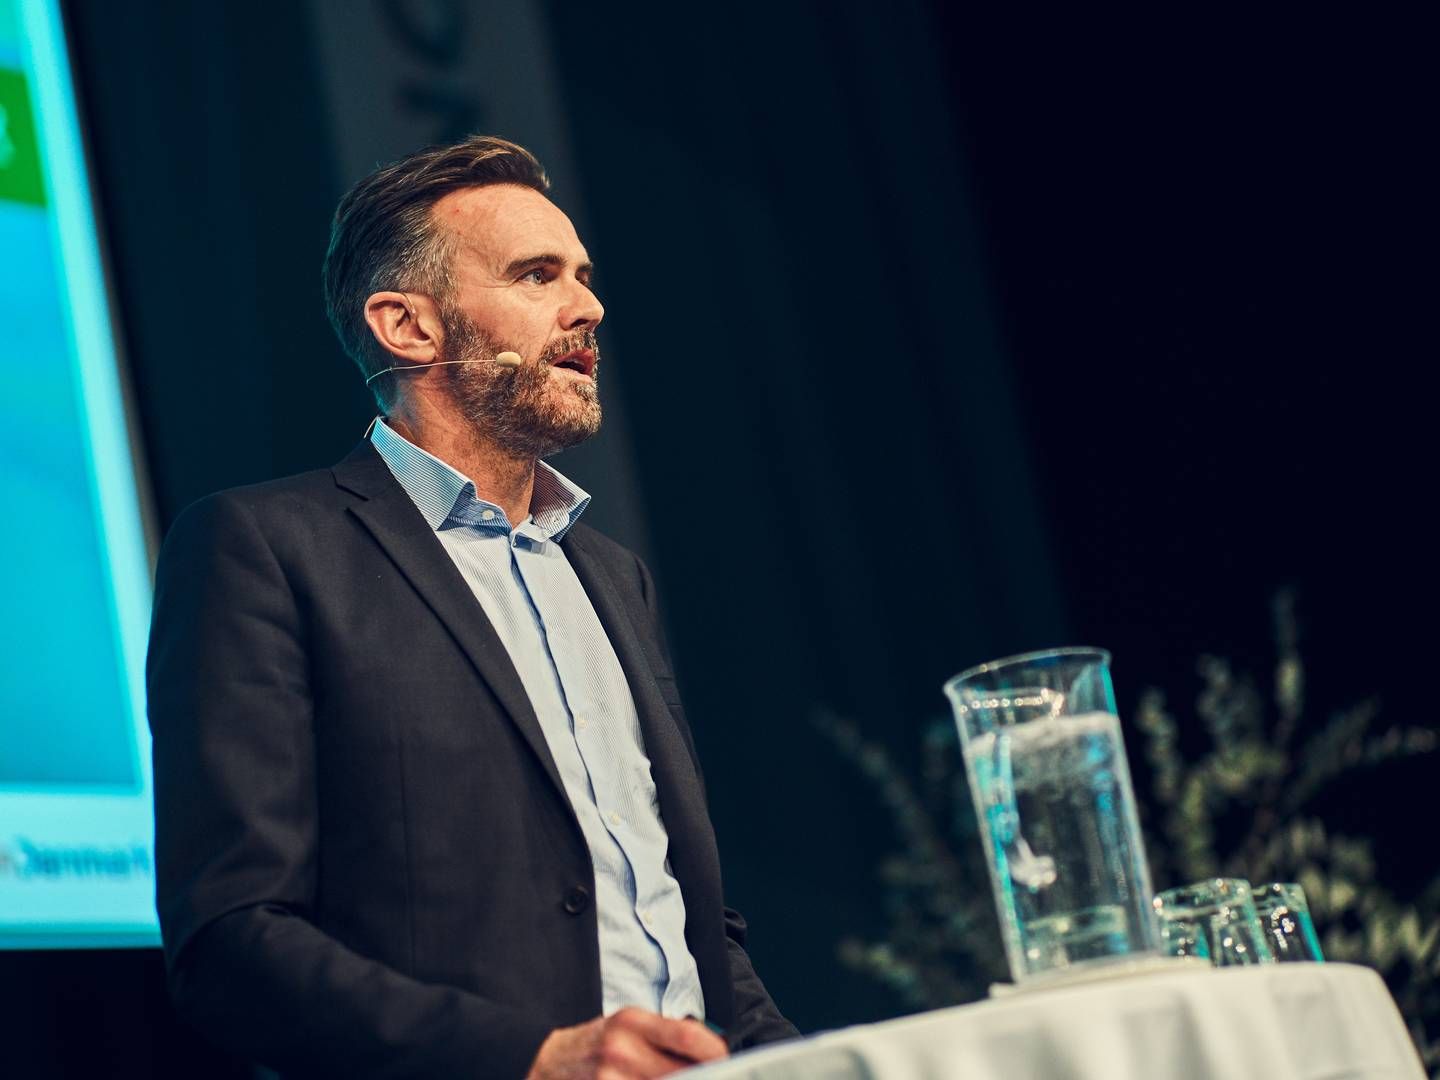 "We're buying more bonds now, but it's not that we're trading properties over there - it's probably more our share of equities that we've reduced a bit," said PensionDanmark's Deputy CEO, Peter Steensgaard Mørch, when he spoke on Tuesday at the Danish industry summit, Ejendom2023. | Photo: Jeppe Carlsen